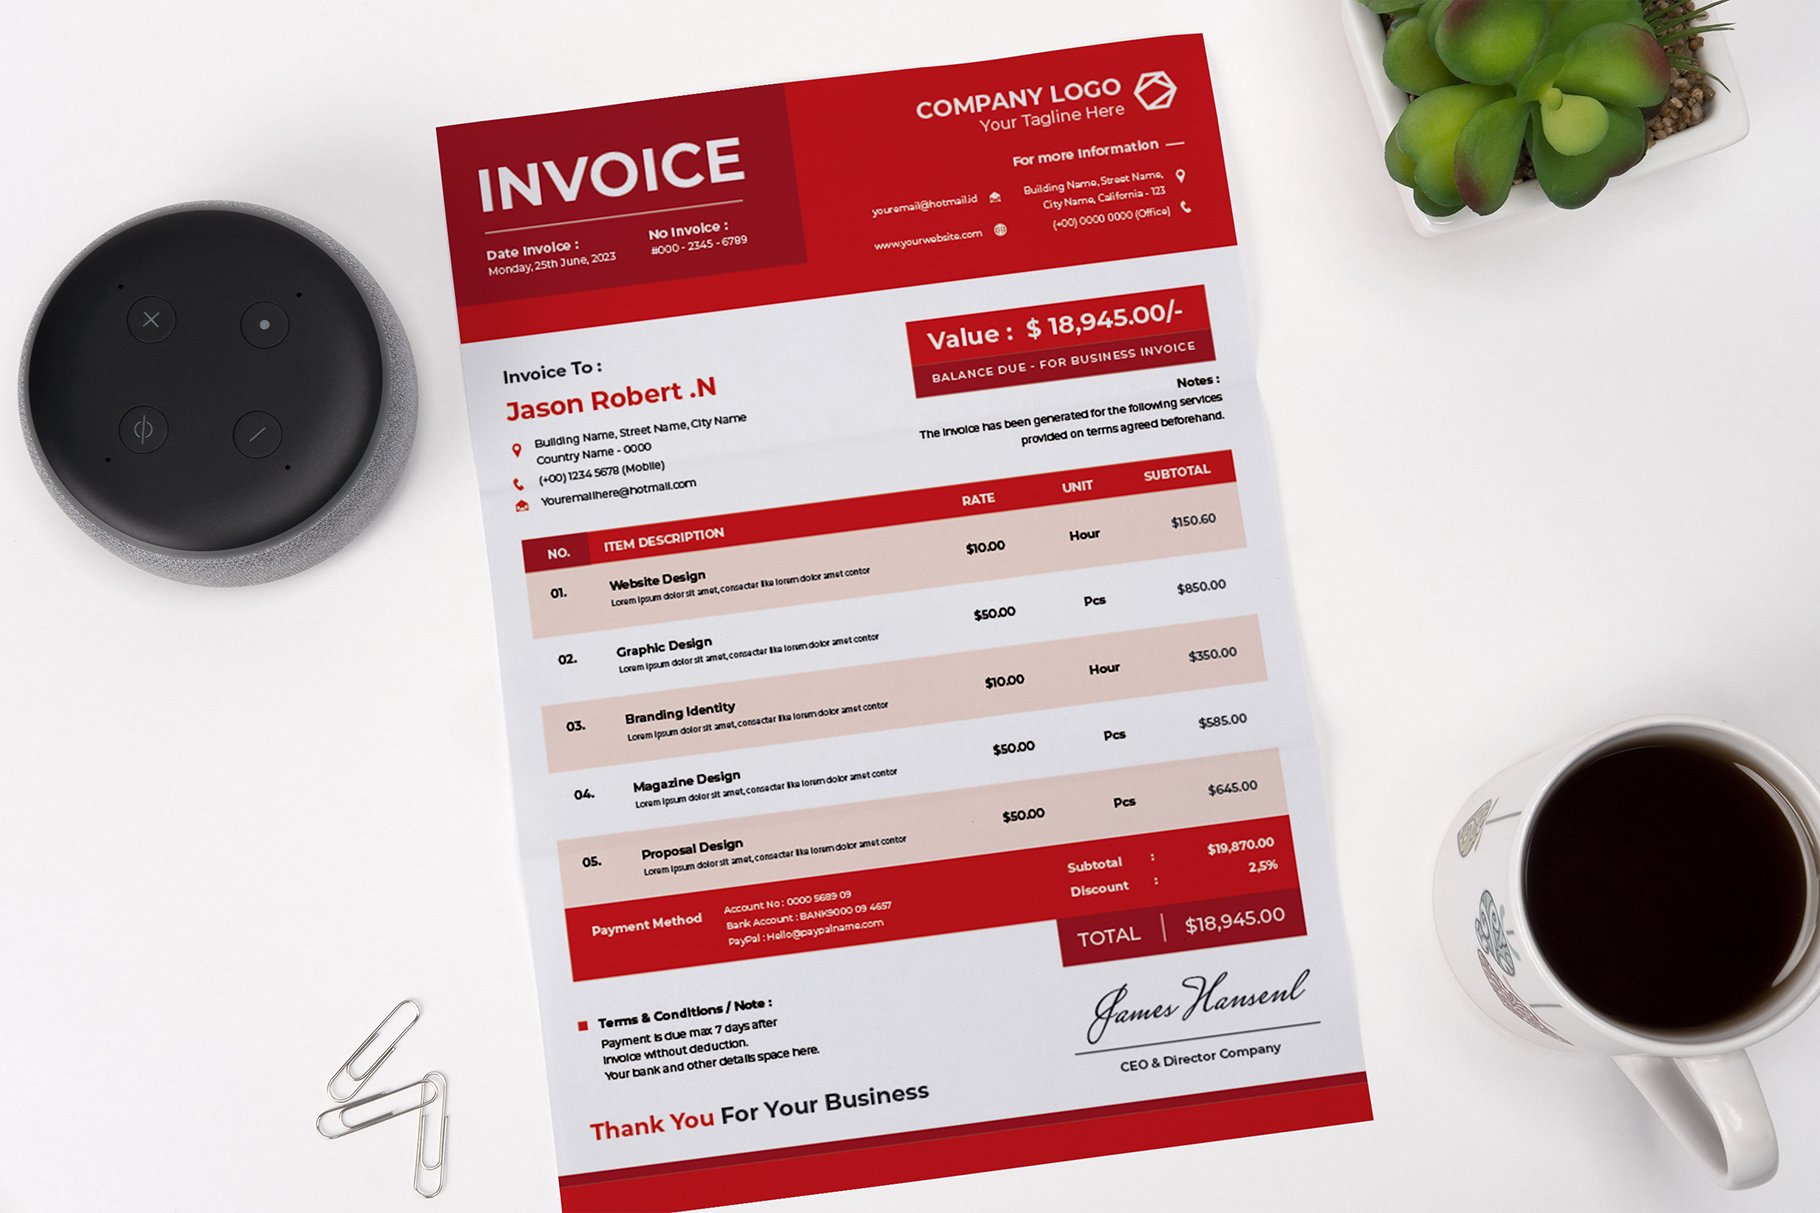 Red Business Tax Invoice cover image.